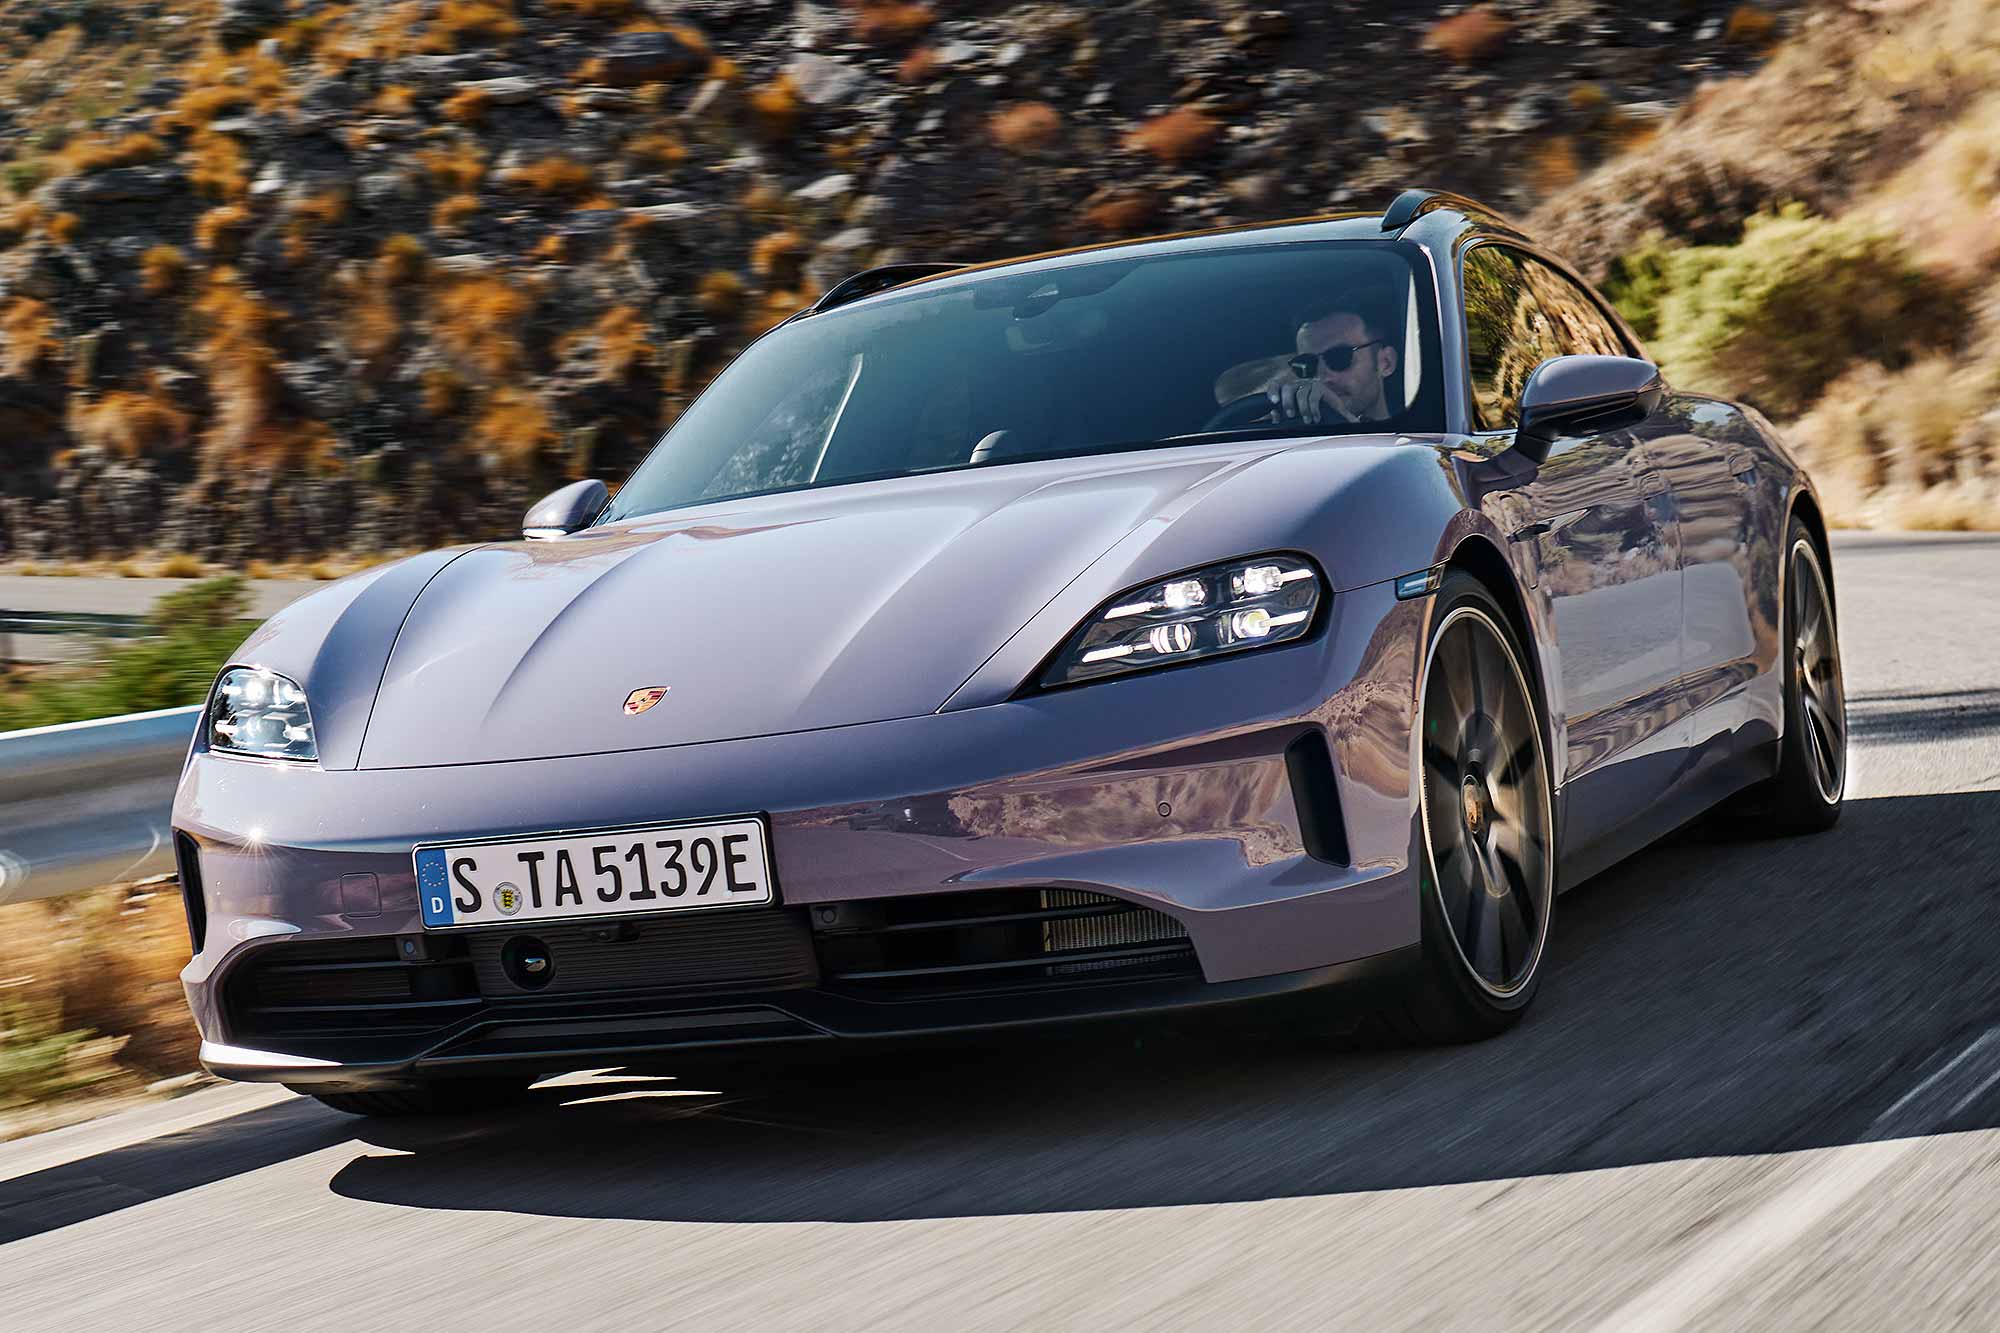 The new Porsche Taycan has updated headlights and newly-contoured front wings.